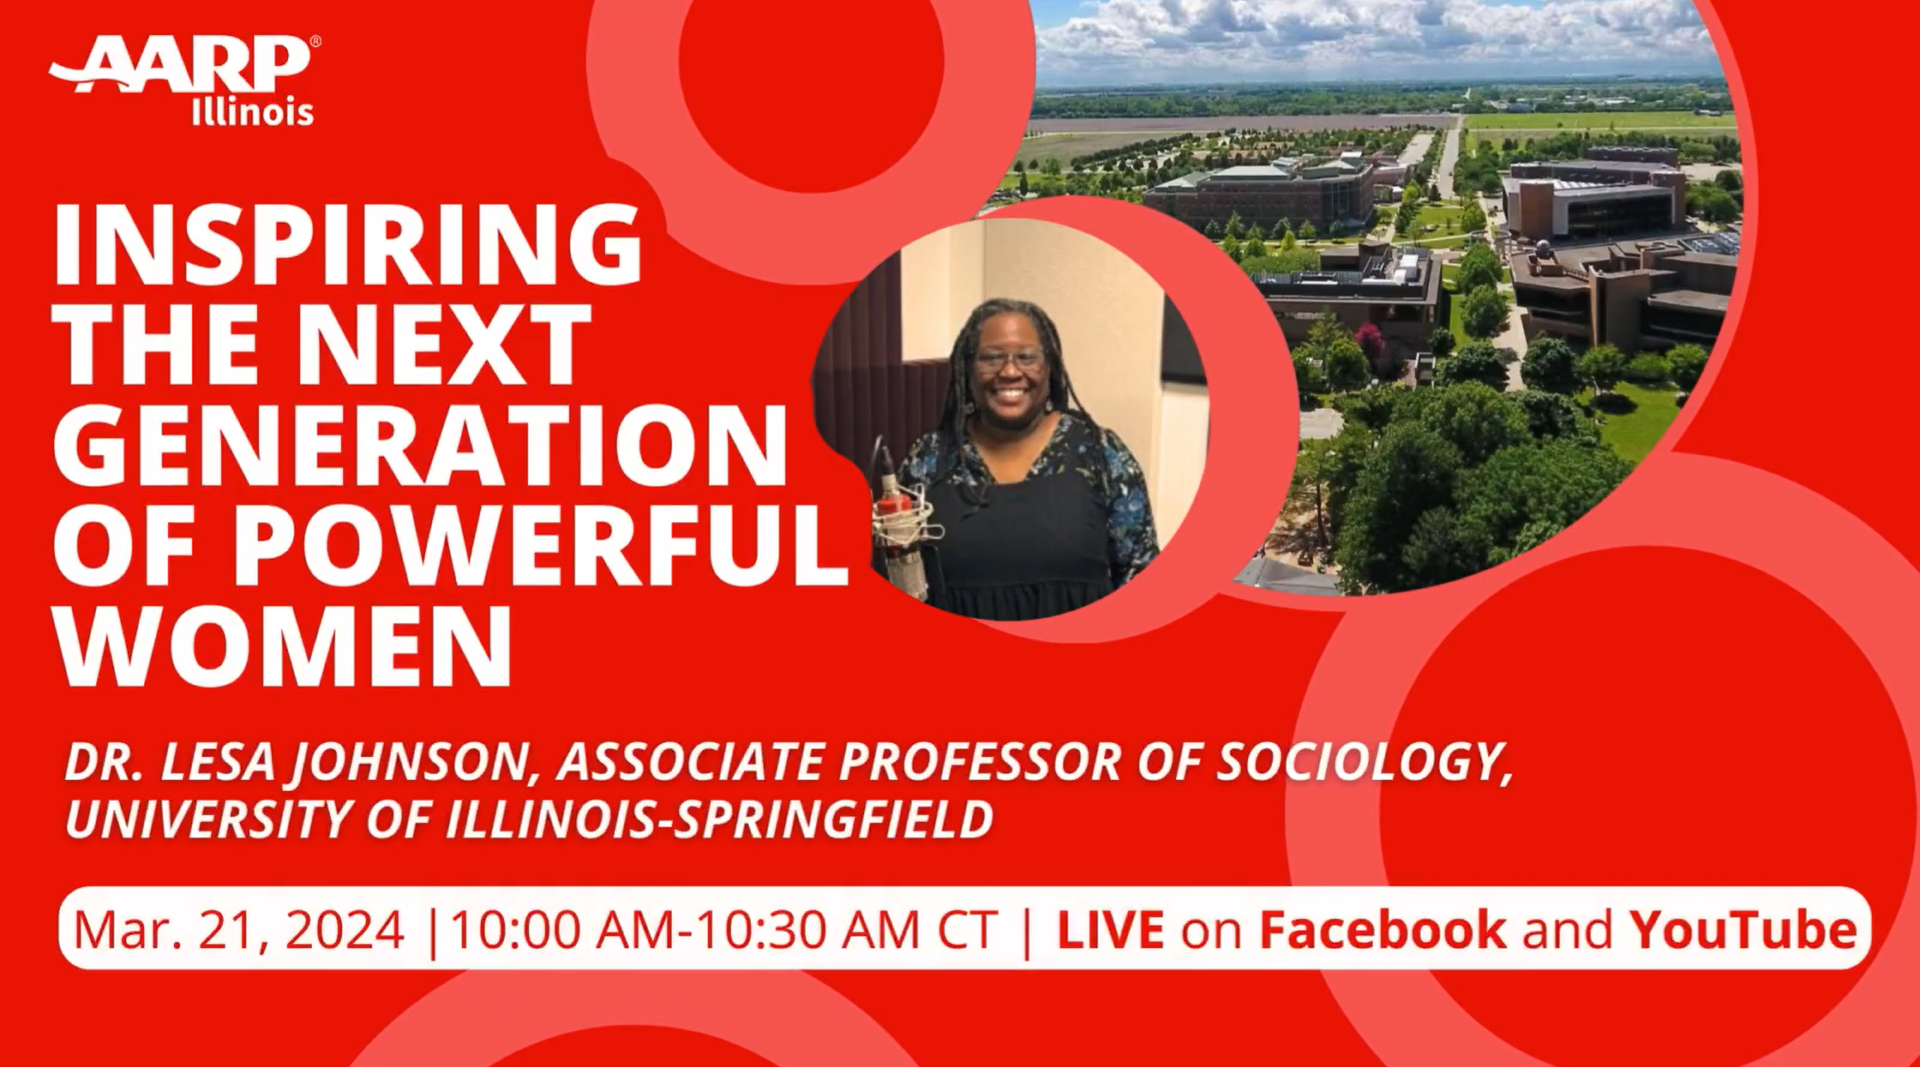 Flyer for the AARP Interview Livestream with Lesa Johnson with the text "Inspiring the Next Generation of Powerful Women."